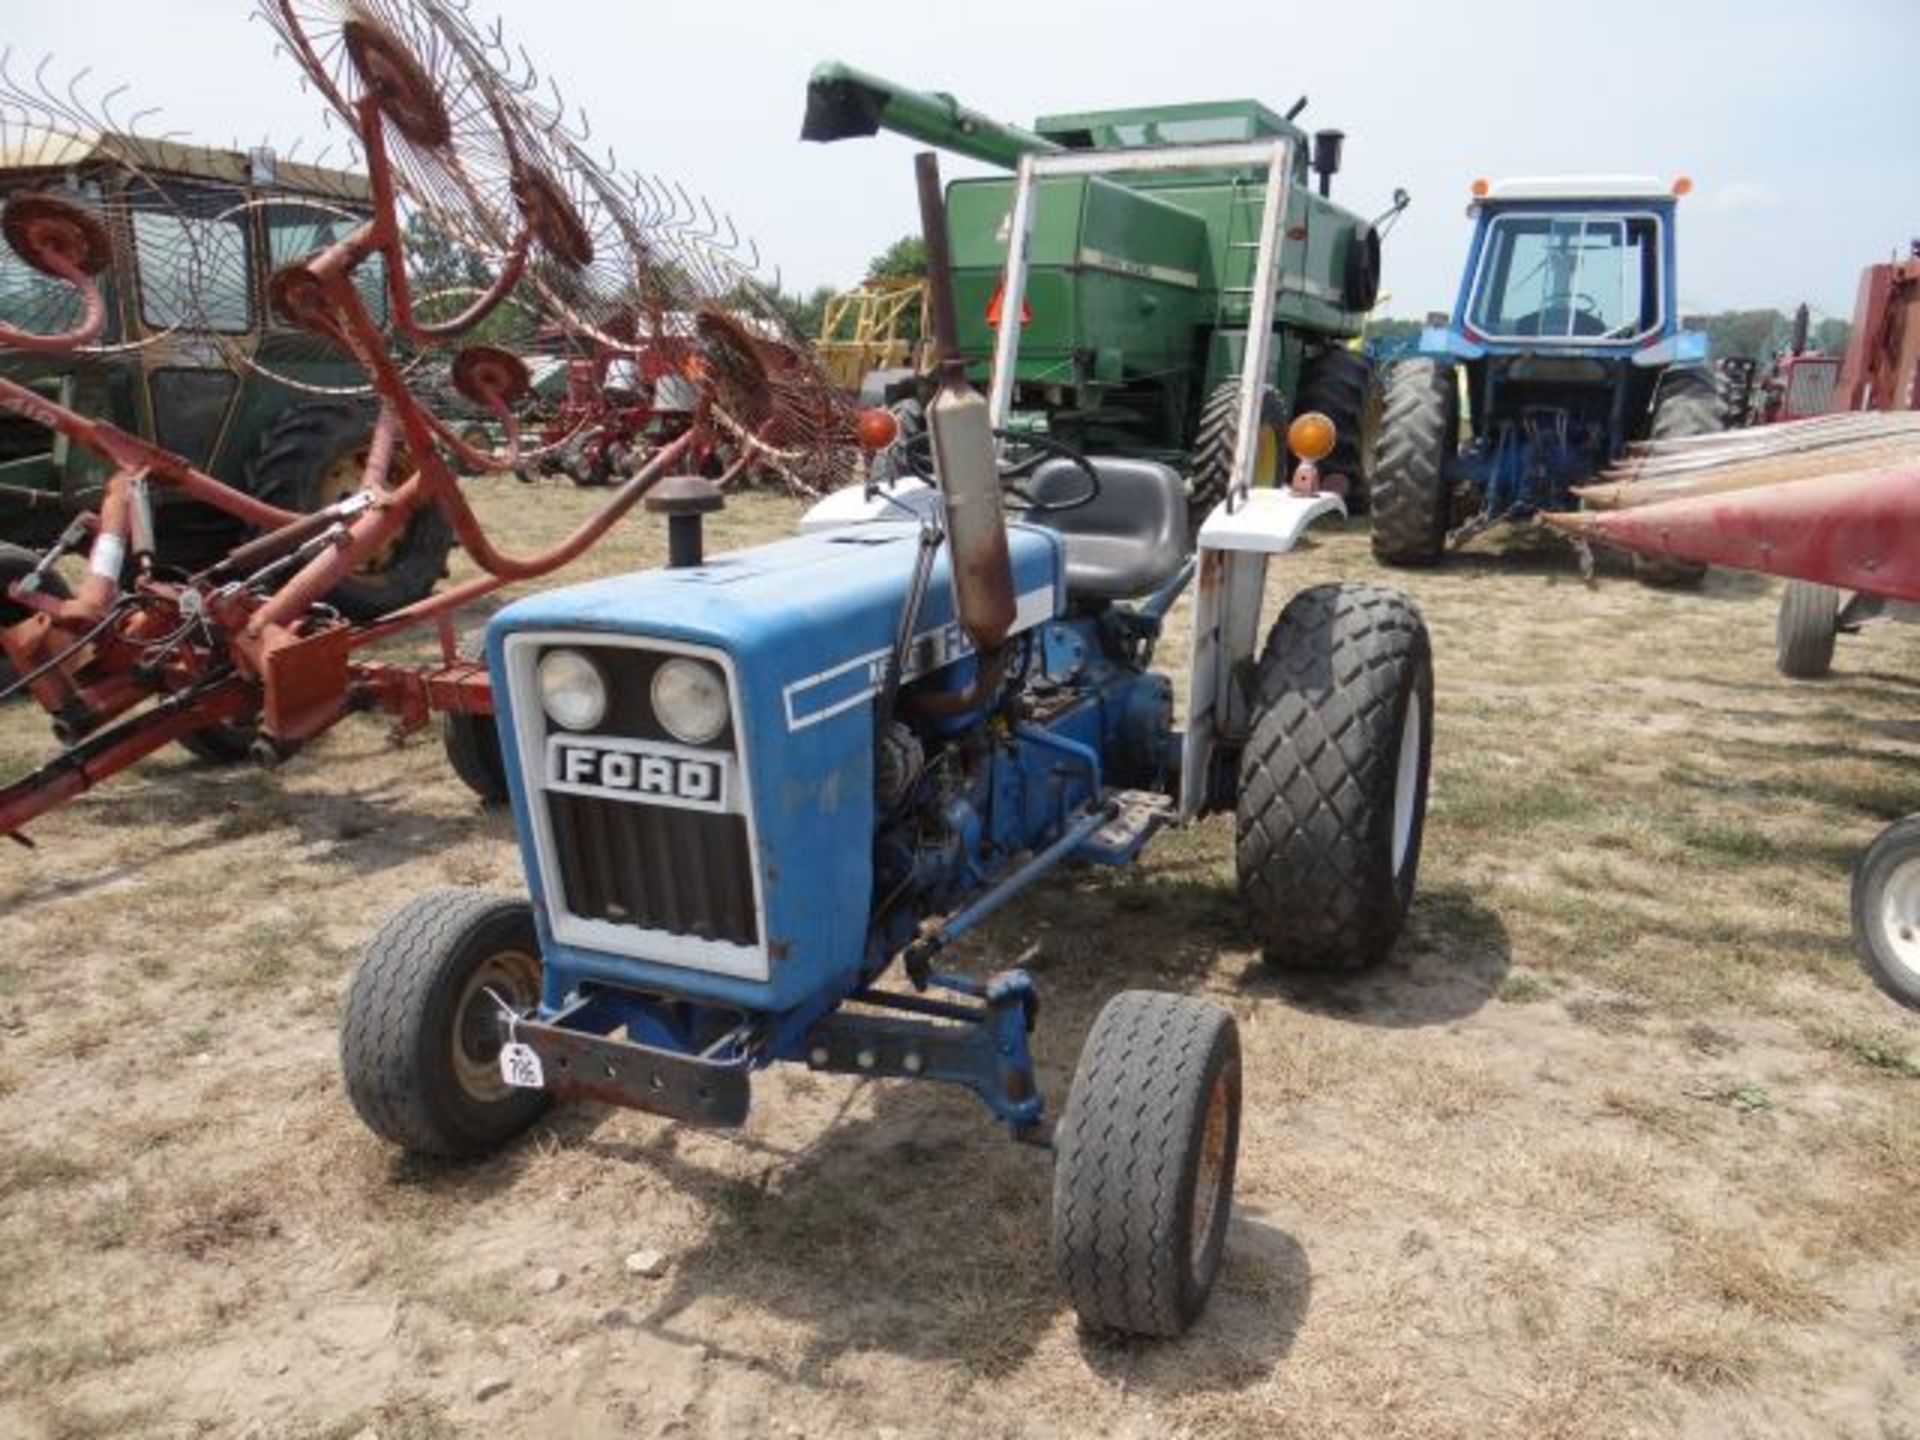 Ford 1600 Tractor, 1977 #112857, 4057 hrs, 2wd, 23hp Diesel, 9F/3R Trans, Diff Lock, 540 PTO - Image 2 of 3